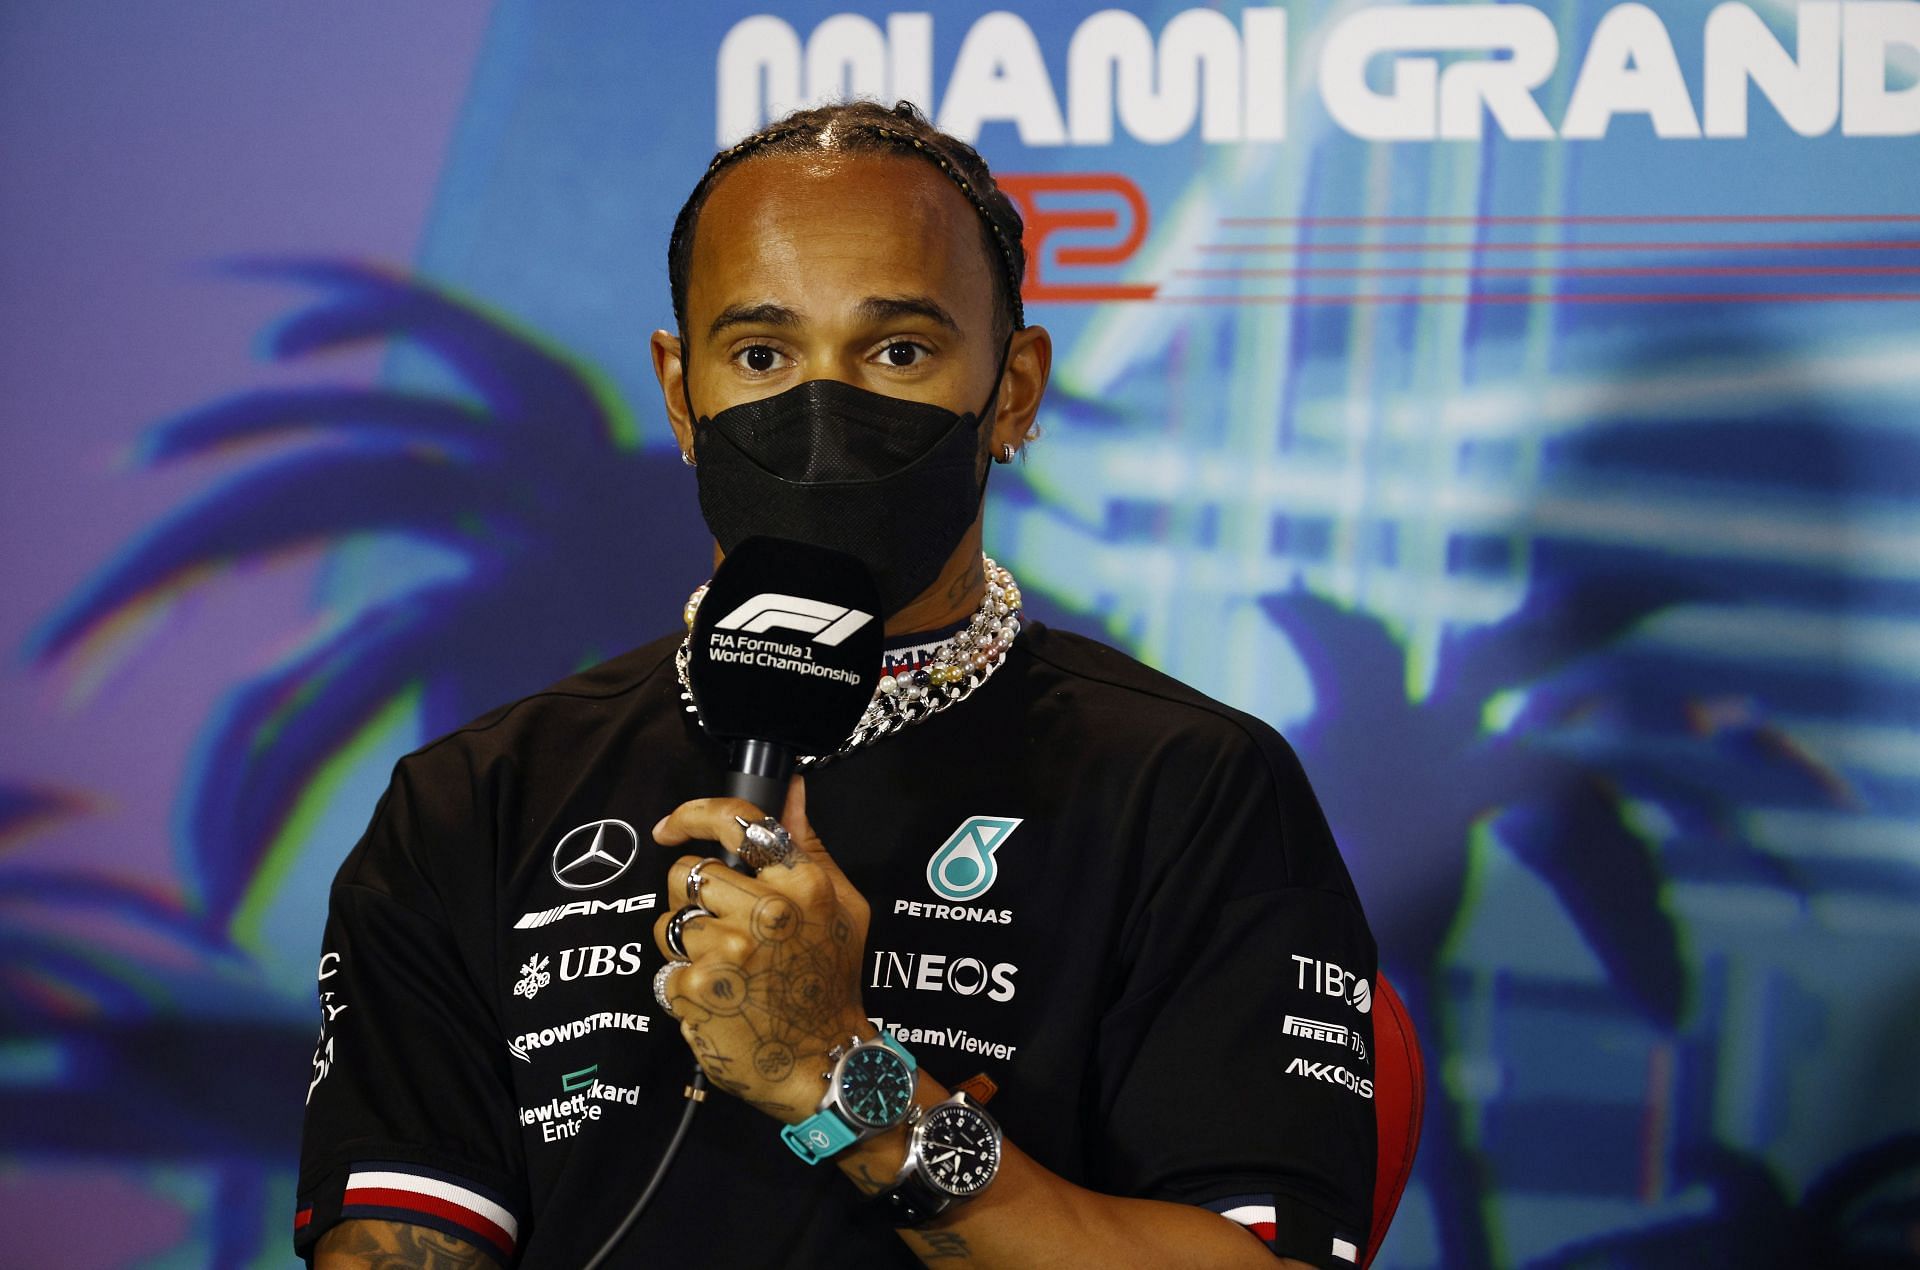 Lewis Hamilton in the pre-race press conference ahead of the 2022 F1 Miami GP (Photo by Jared C. Tilton/Getty Images)